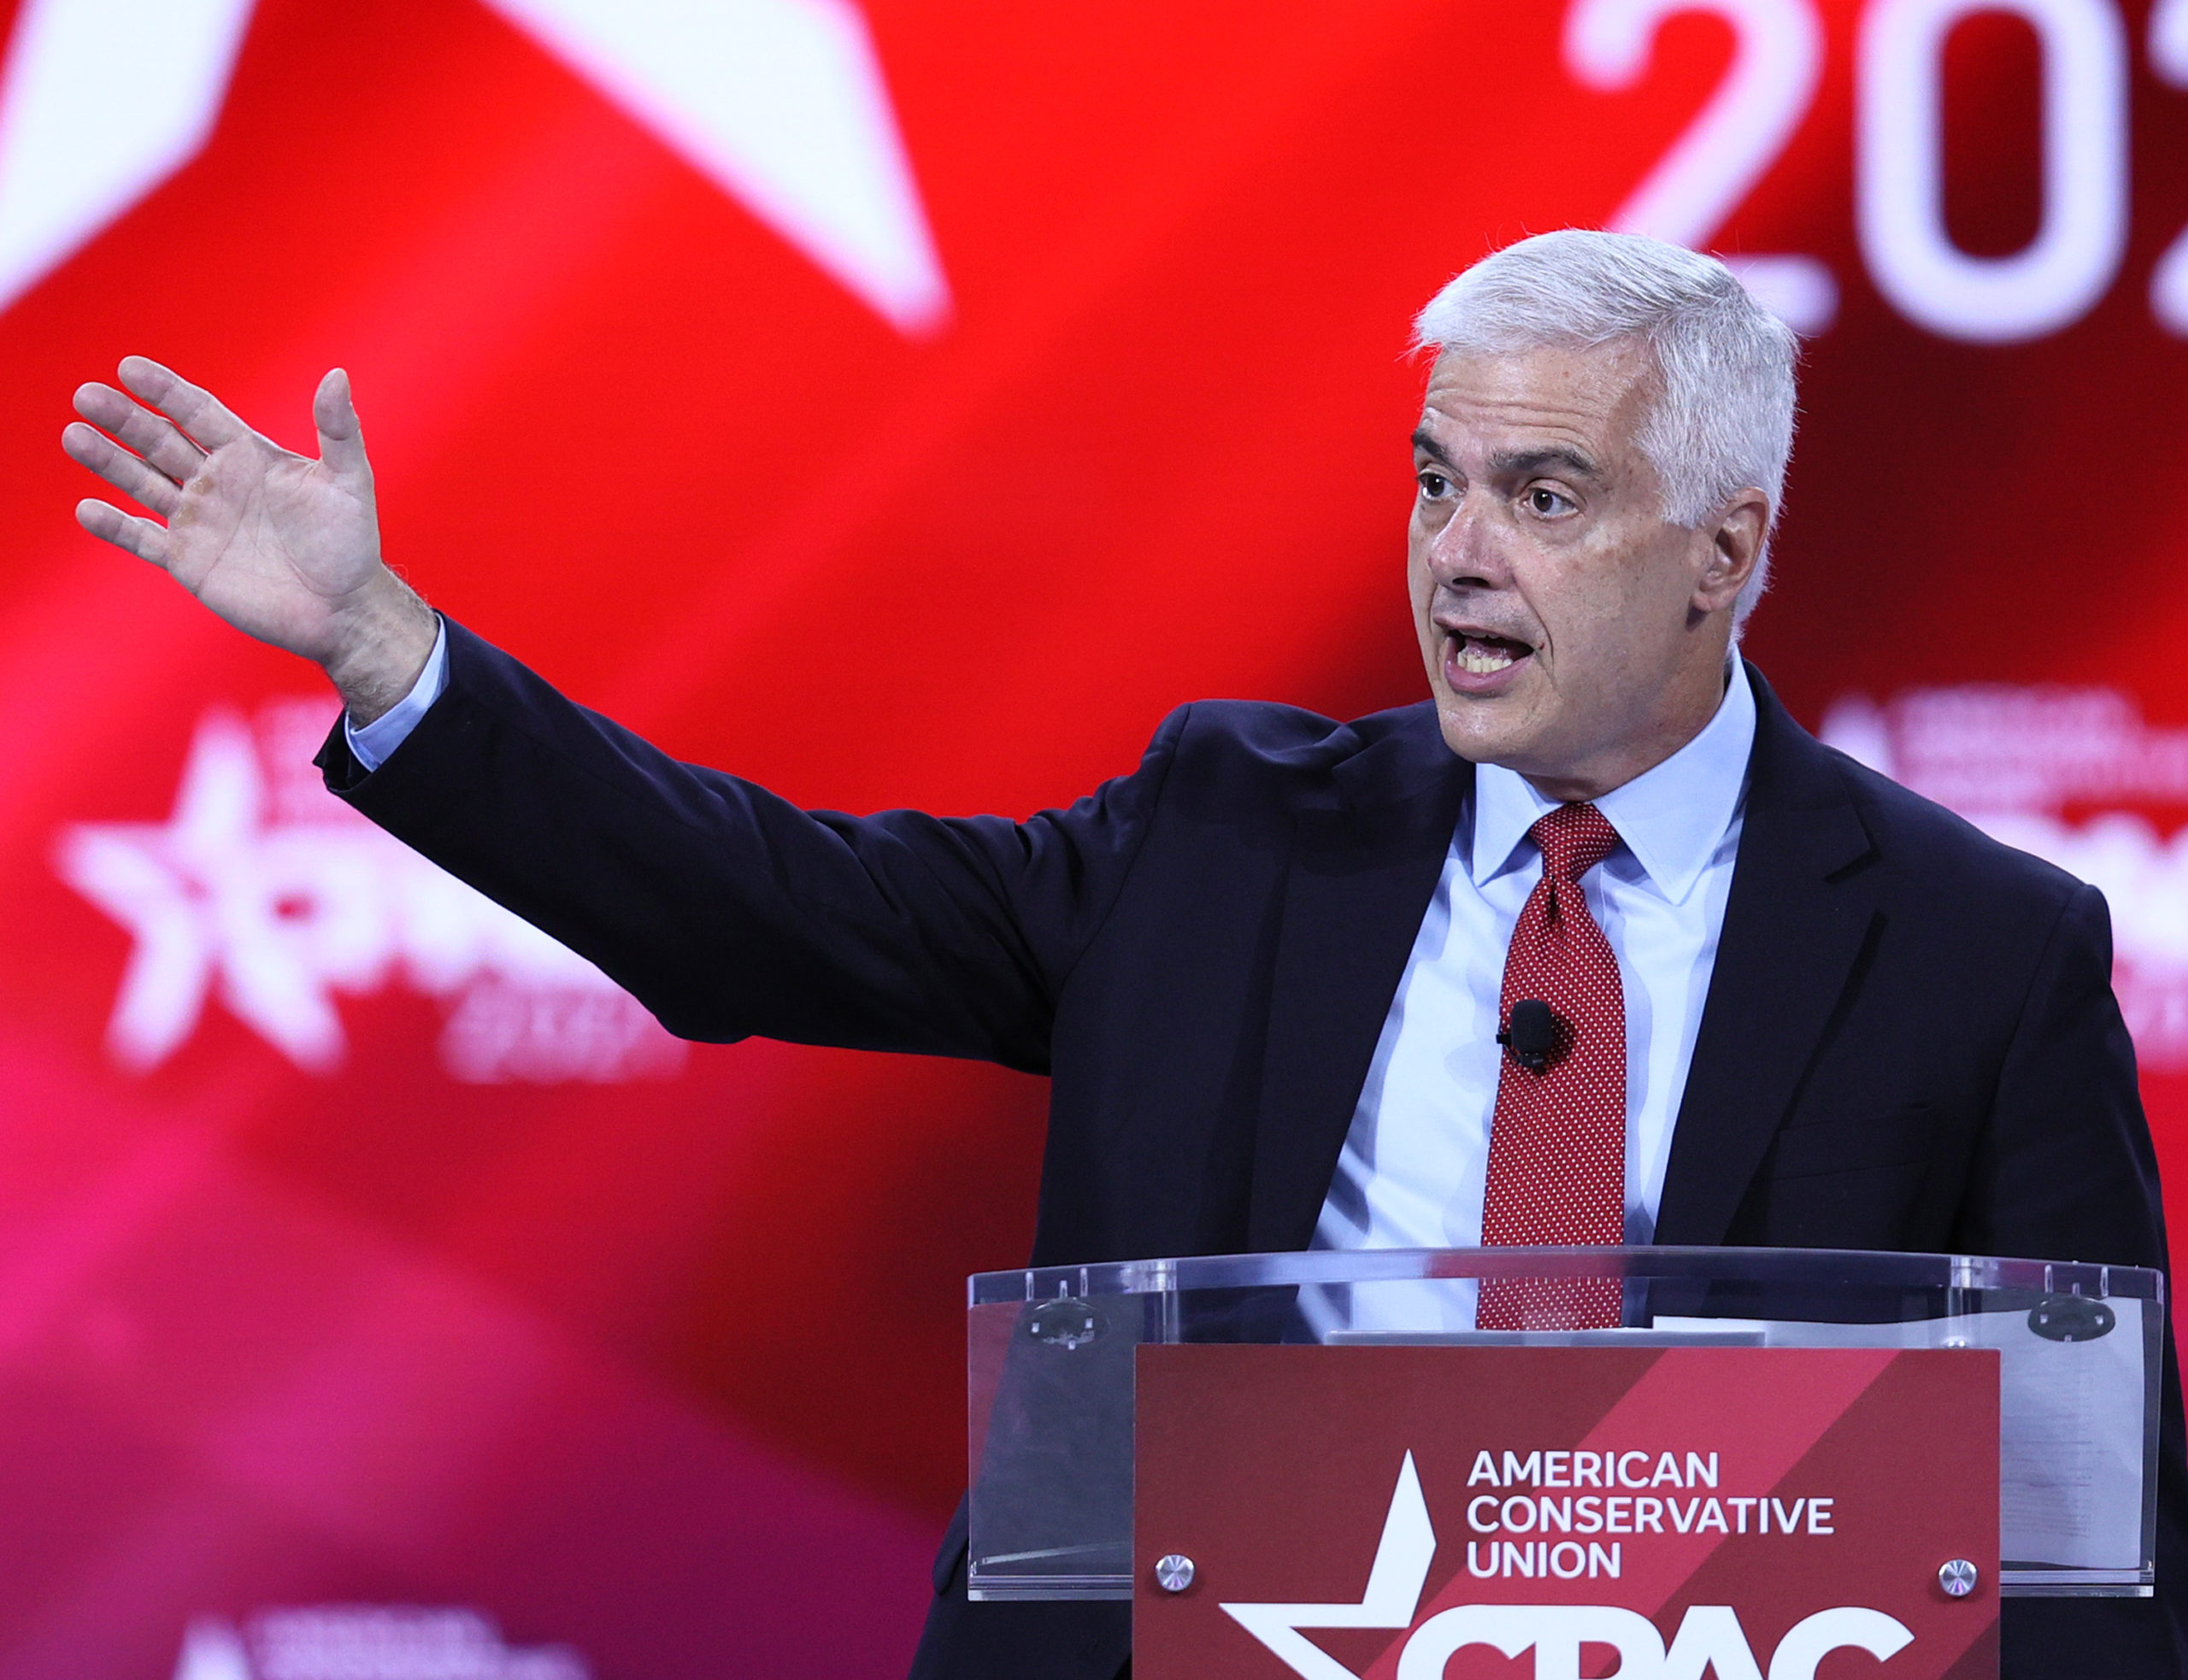 ORLANDO, FLORIDA - FEBRUARY 28: David McIntosh, Club for Growth, addresses the Conservative Political Action Conference held in the Hyatt Regency on February 28, 2021 in Orlando, Florida. Begun in 1974, CPAC brings together conservative organizations, activists, and world leaders to discuss issues important to them. (Photo by Joe Raedle/Getty Images)